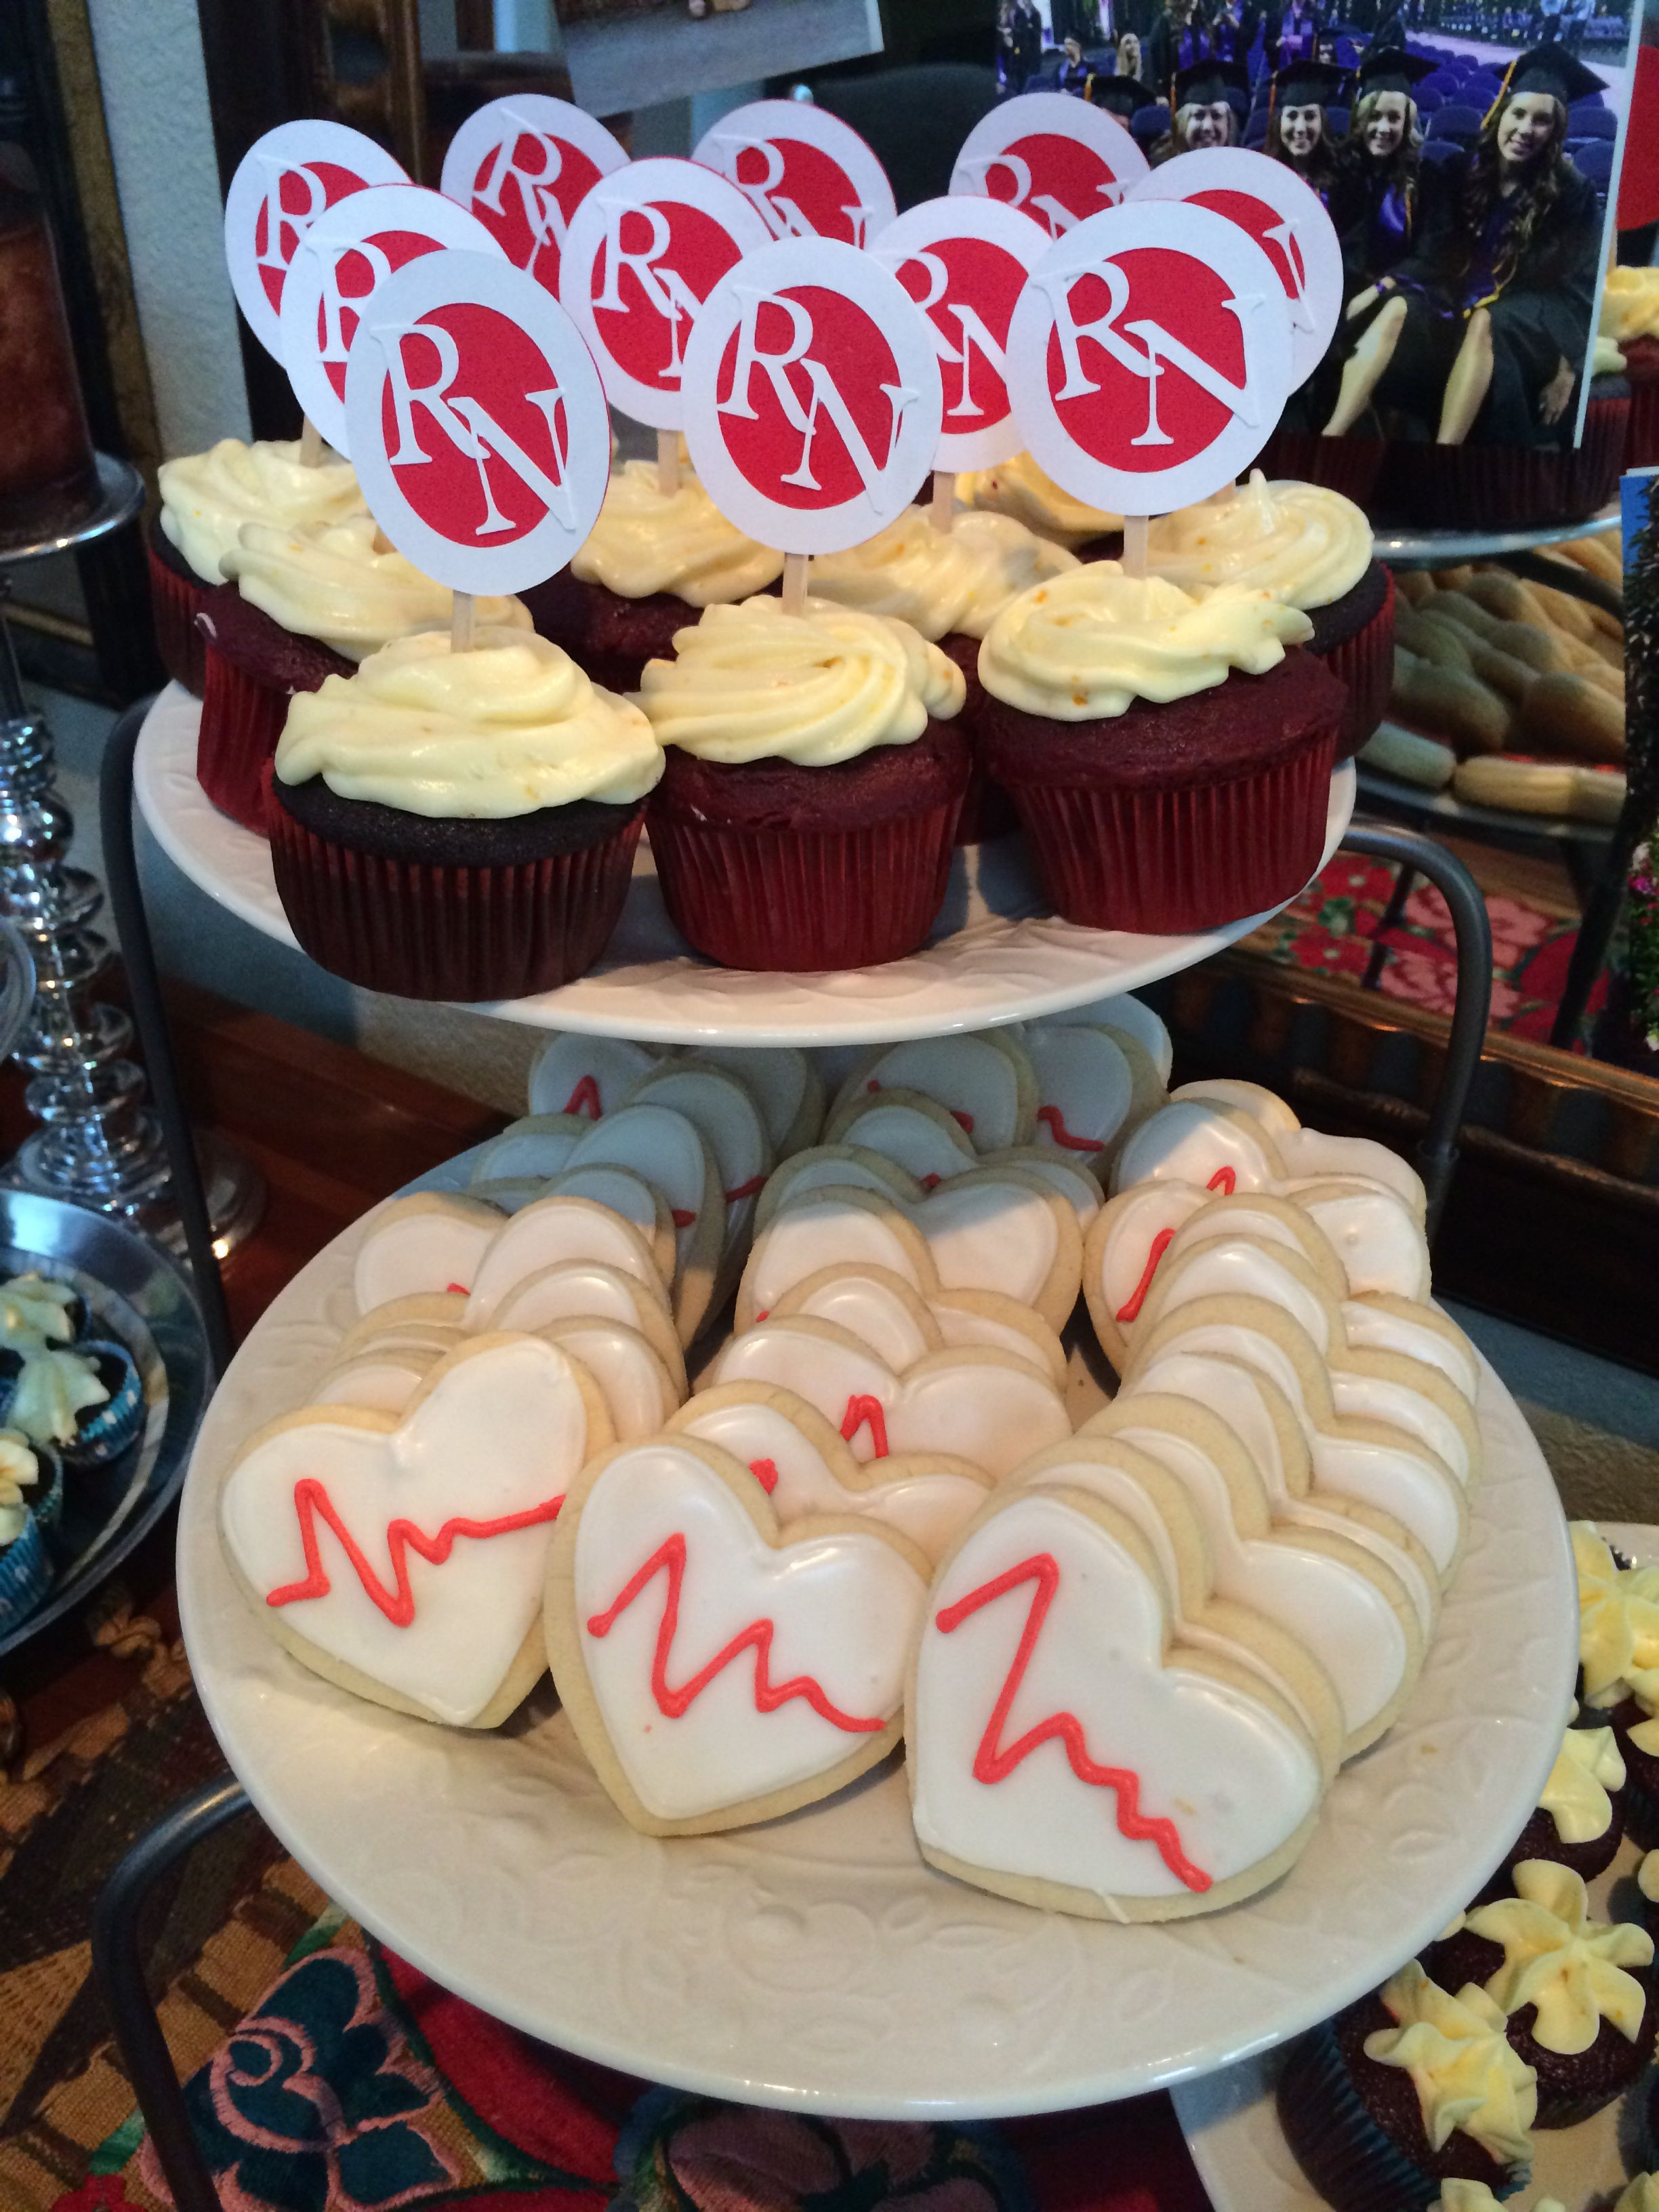 Nursing School Graduation Party Ideas
 Homemade EKG cookies and RN cupcake toppers for Nursing